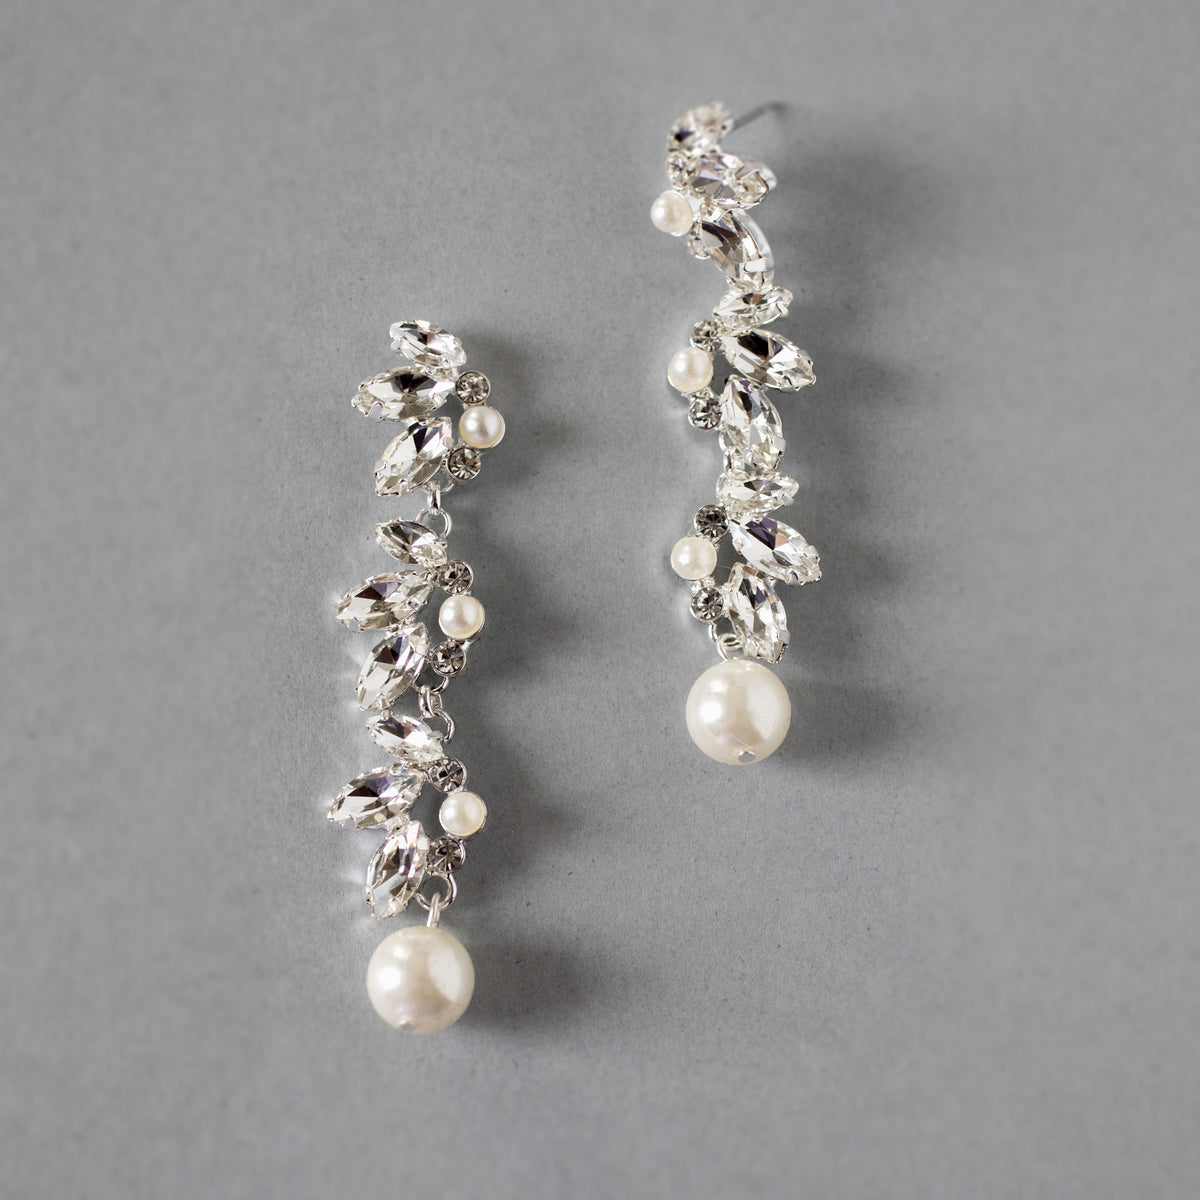 Marquise Crystal Drop Earrings with Pearls